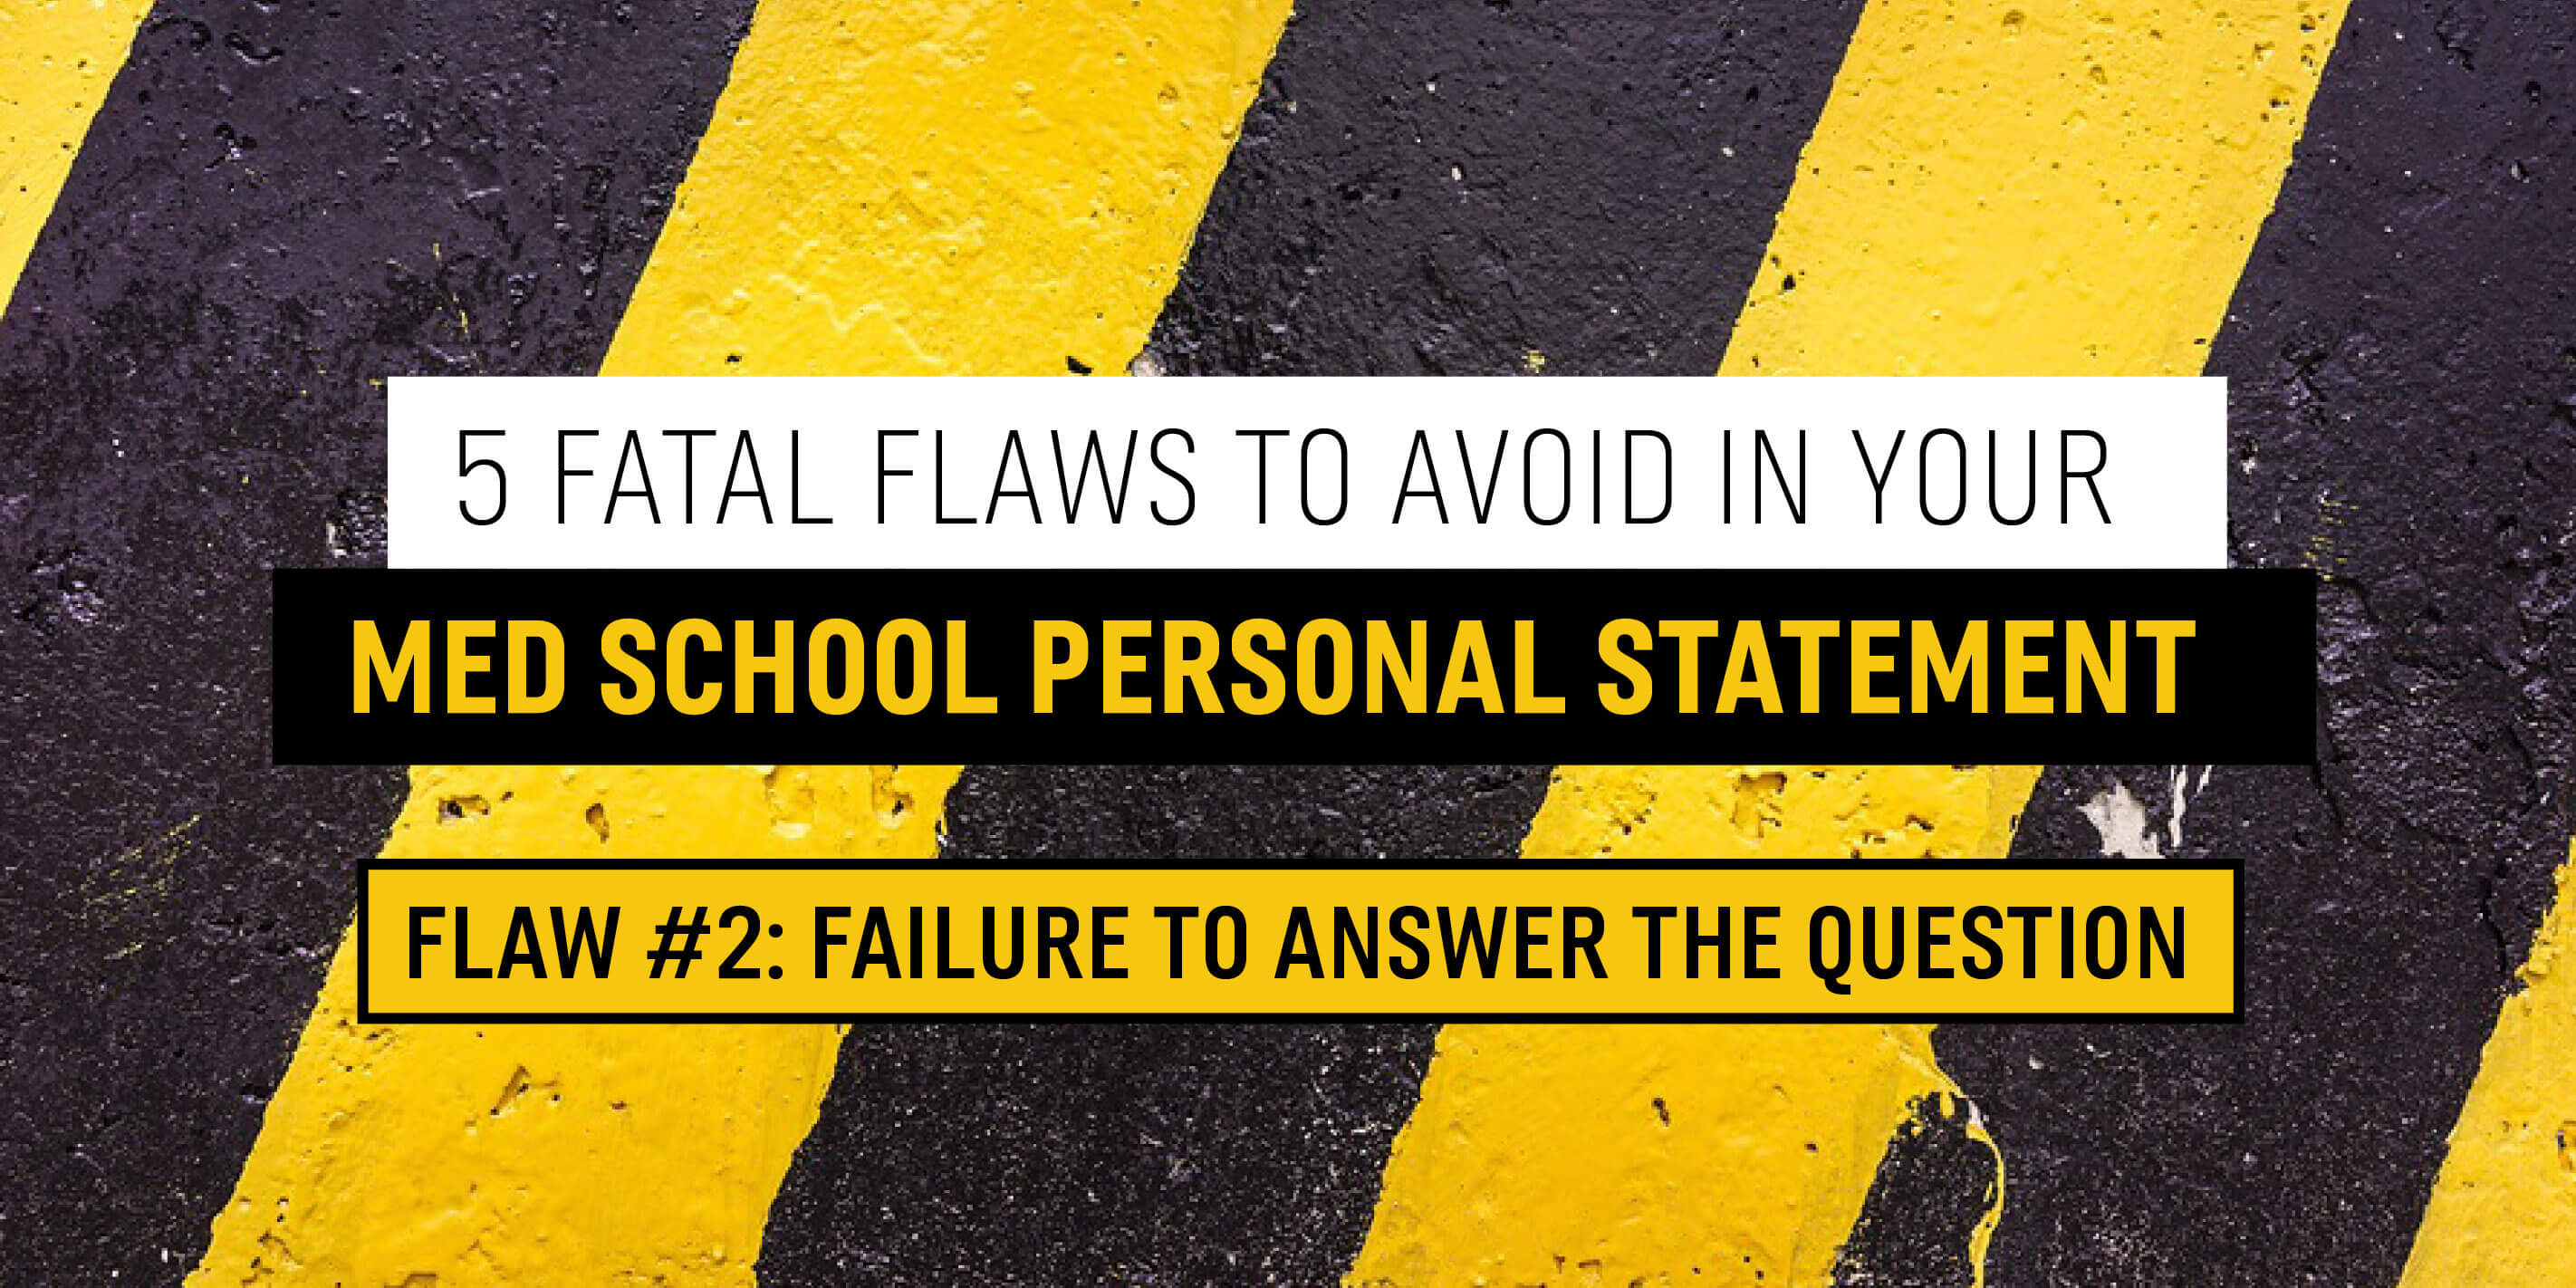 Avoid med school application flaw #2: Failure to answer the question